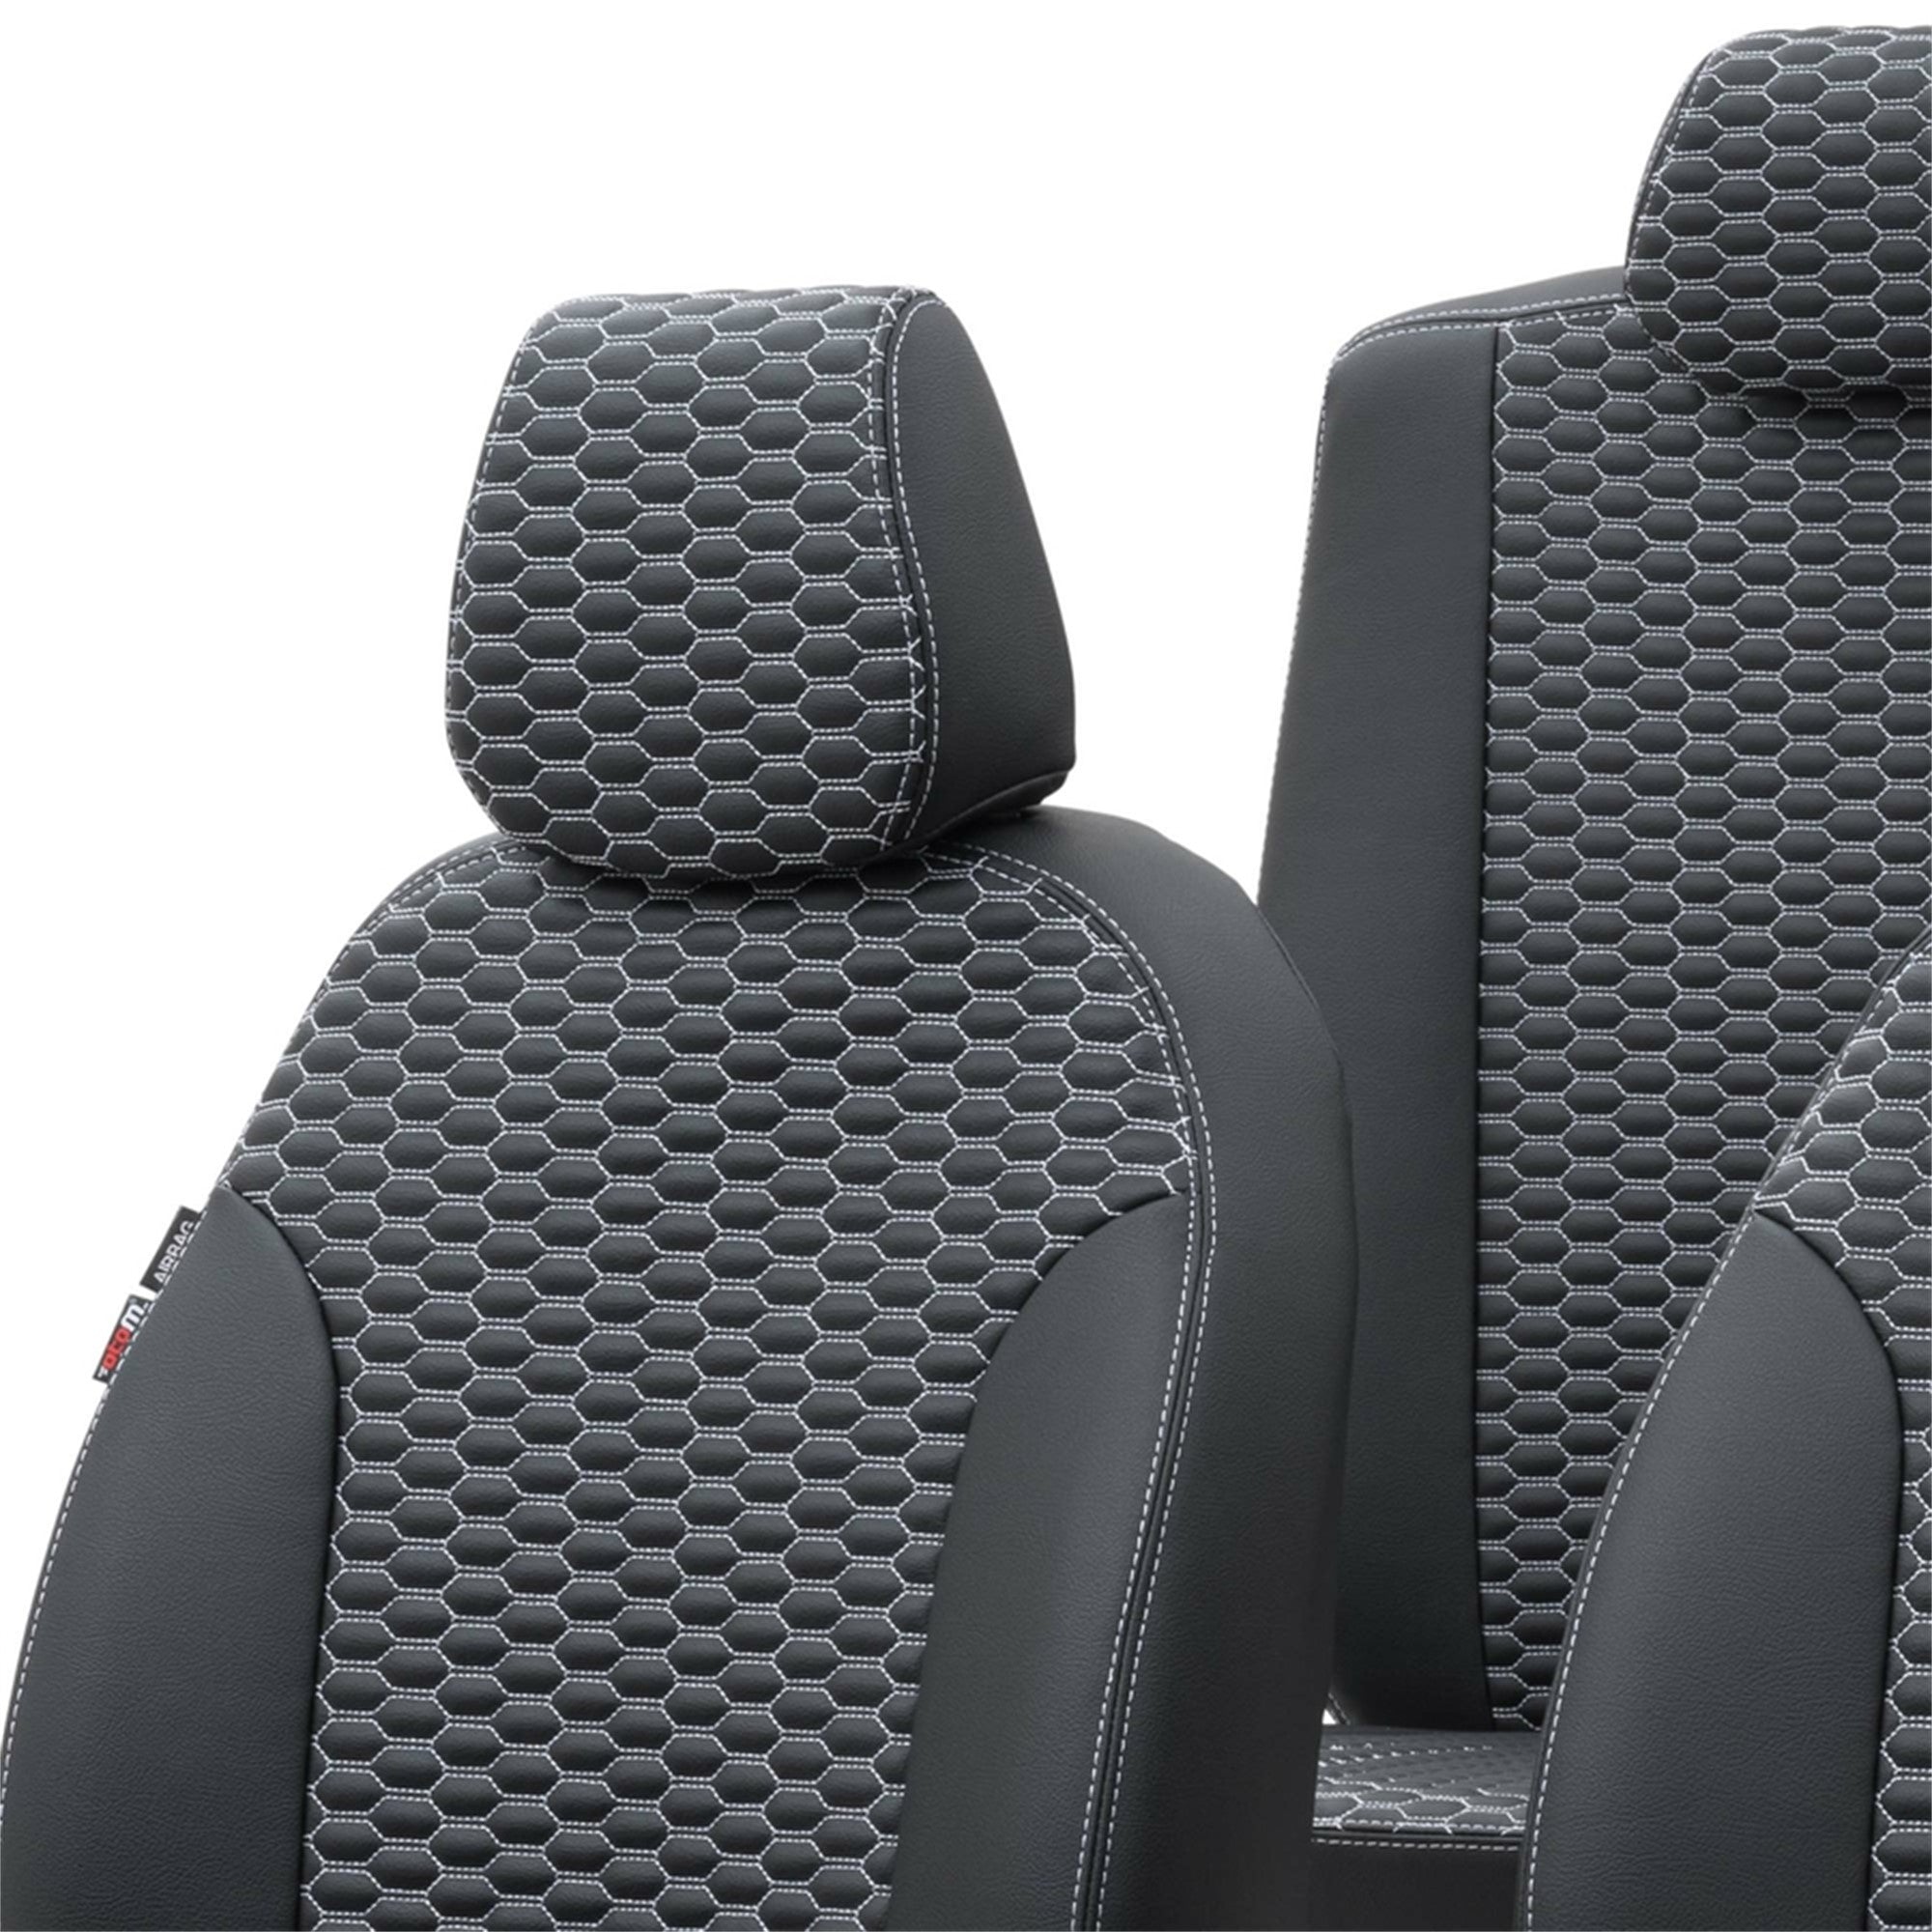 How To Install Car Seat Covers From Amazon ?